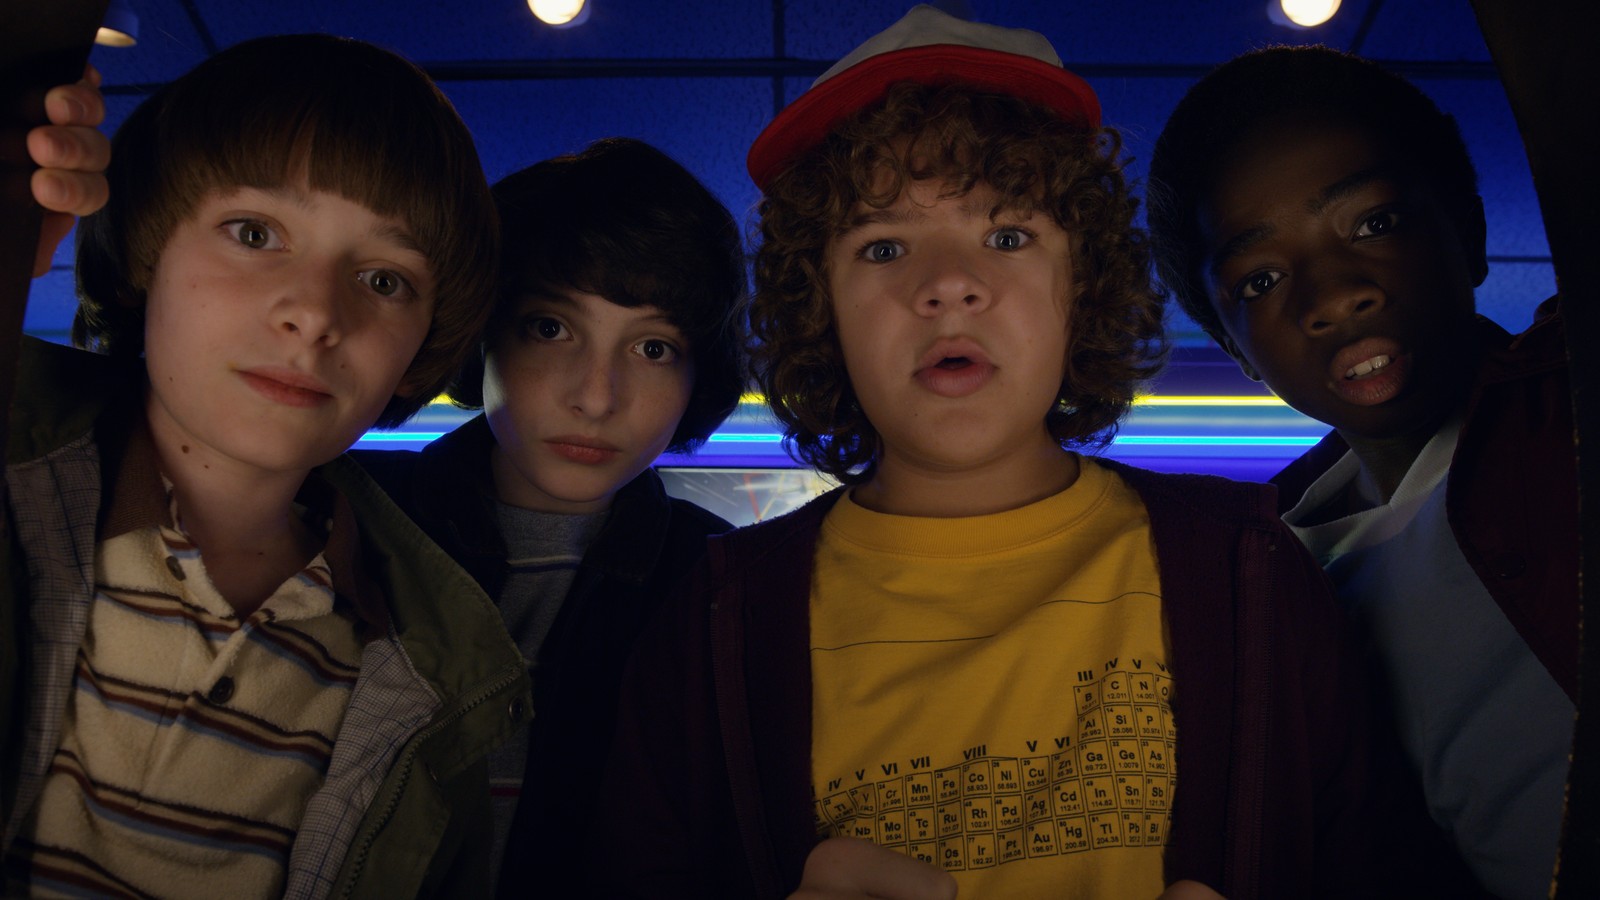 Dark': This Netflix Show Is a Sinister Version of Stranger Things